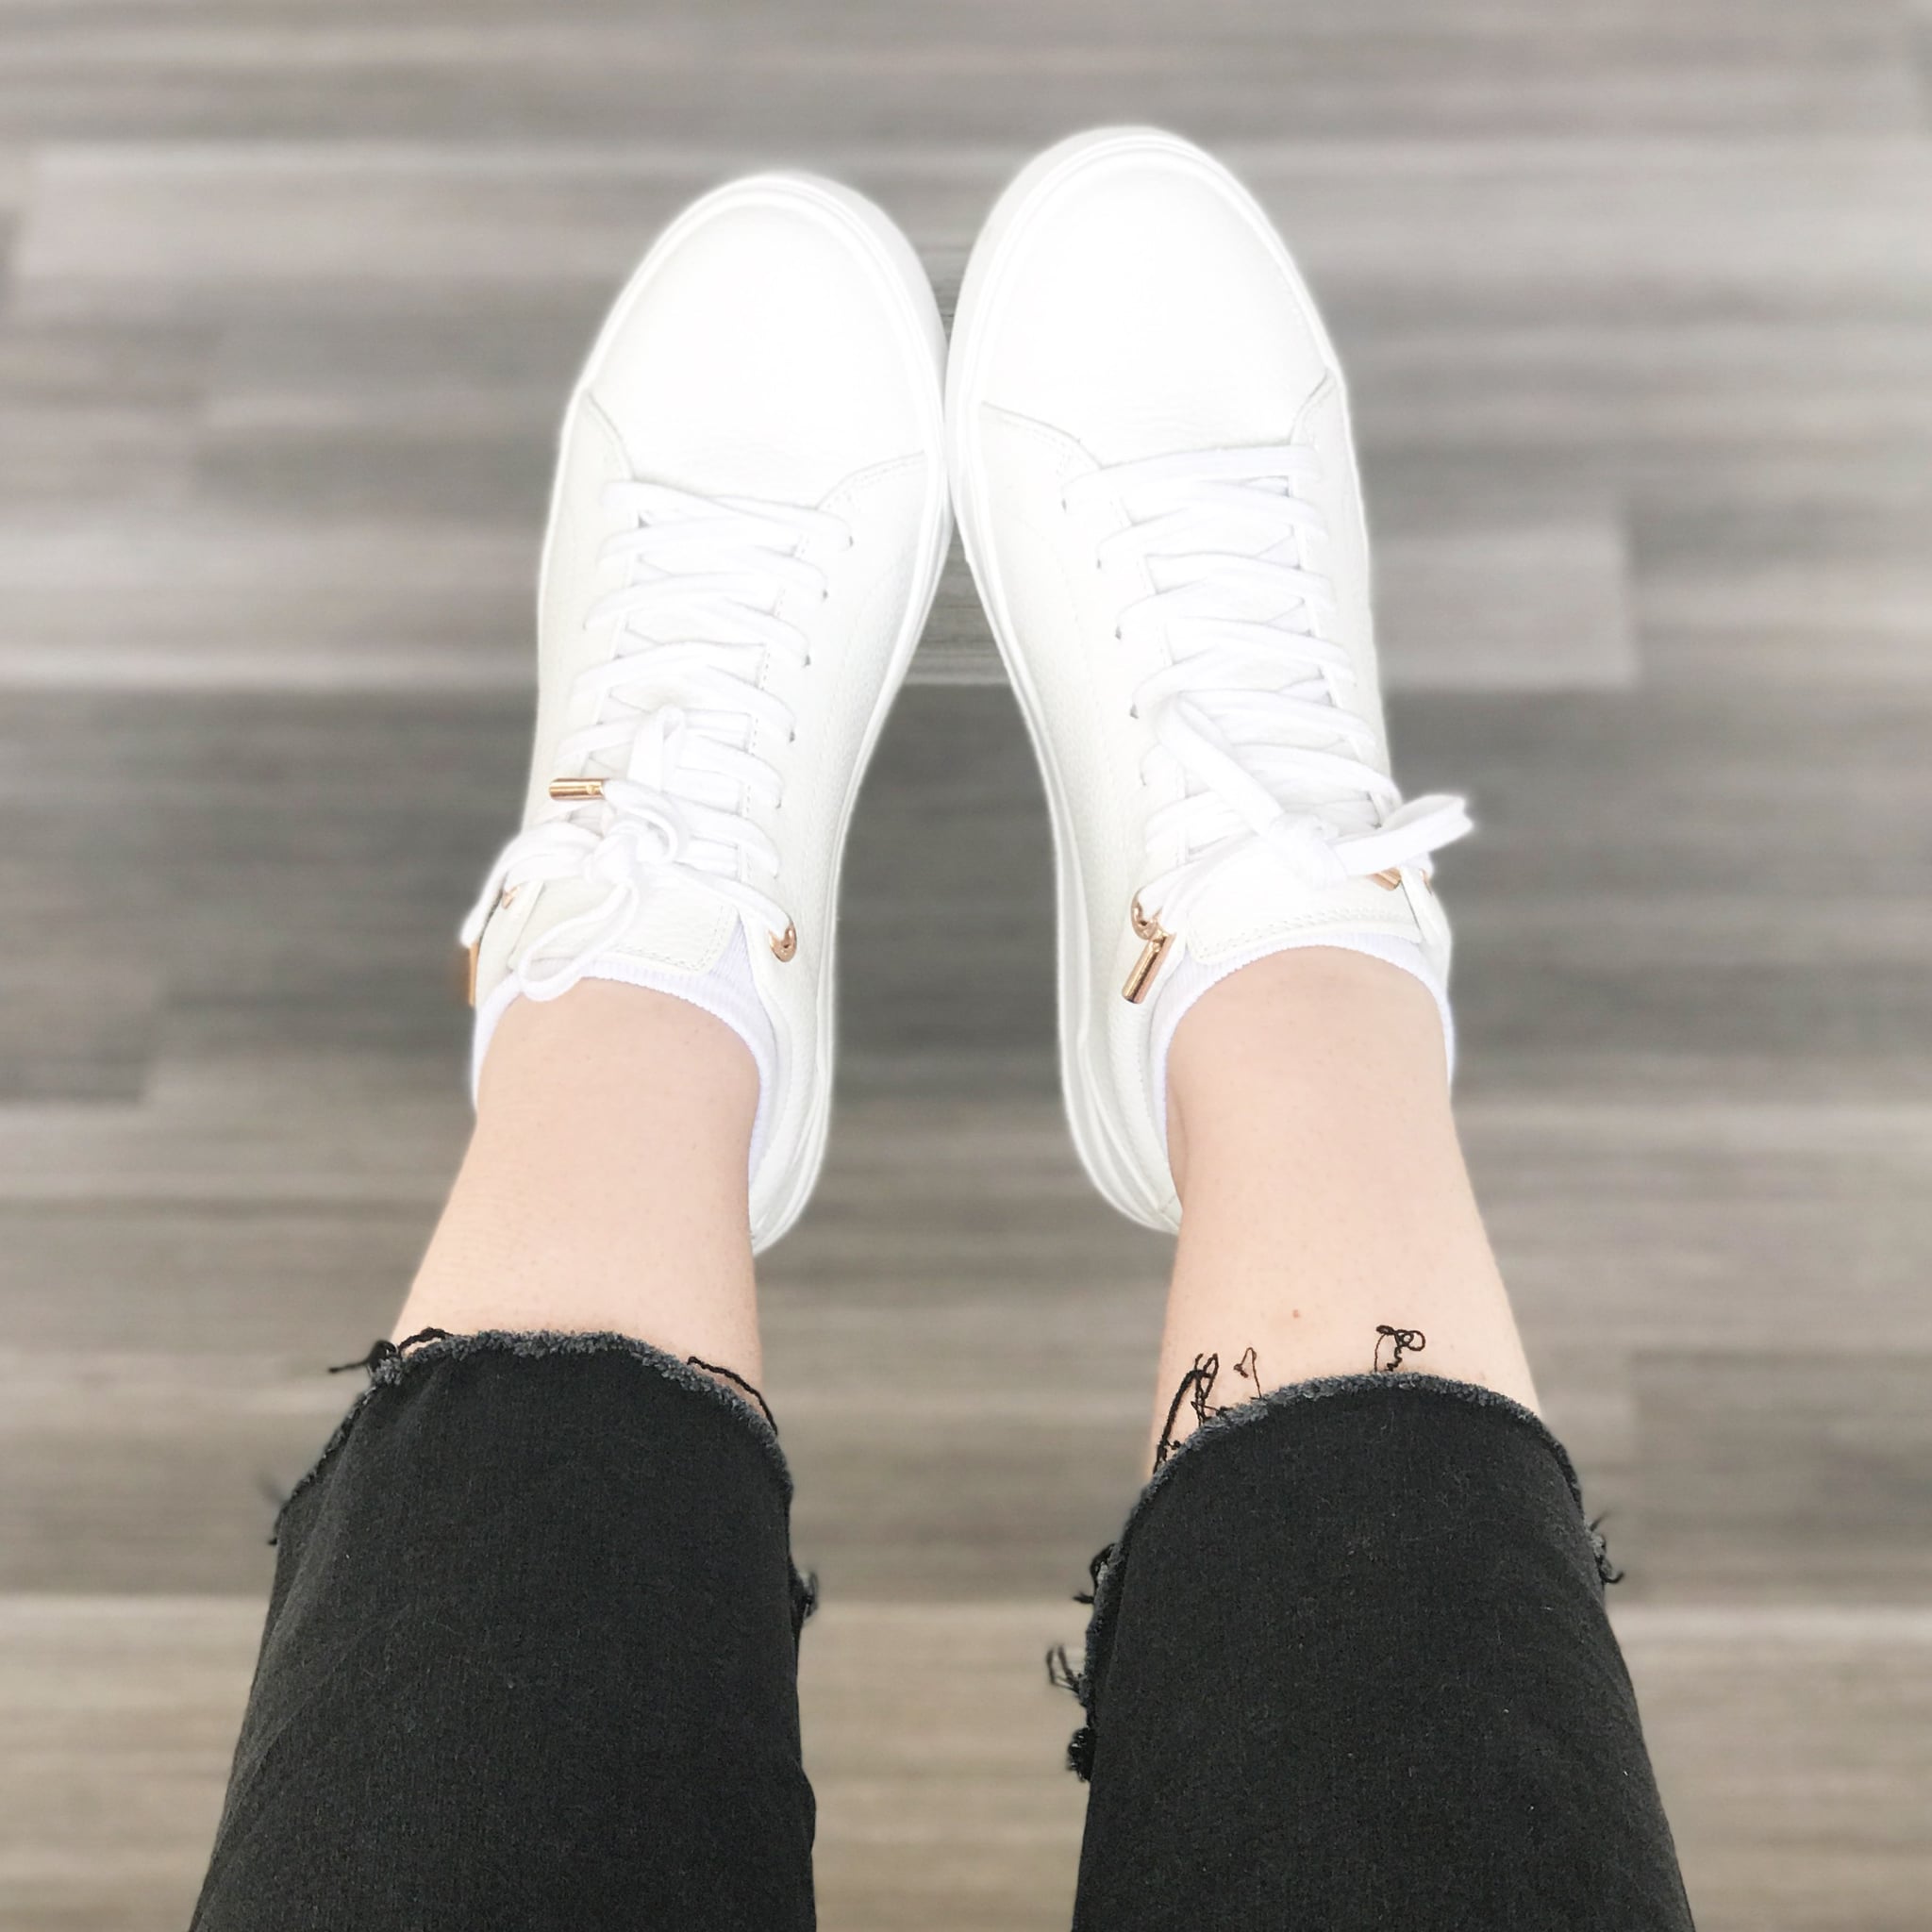 comfy white sneakers